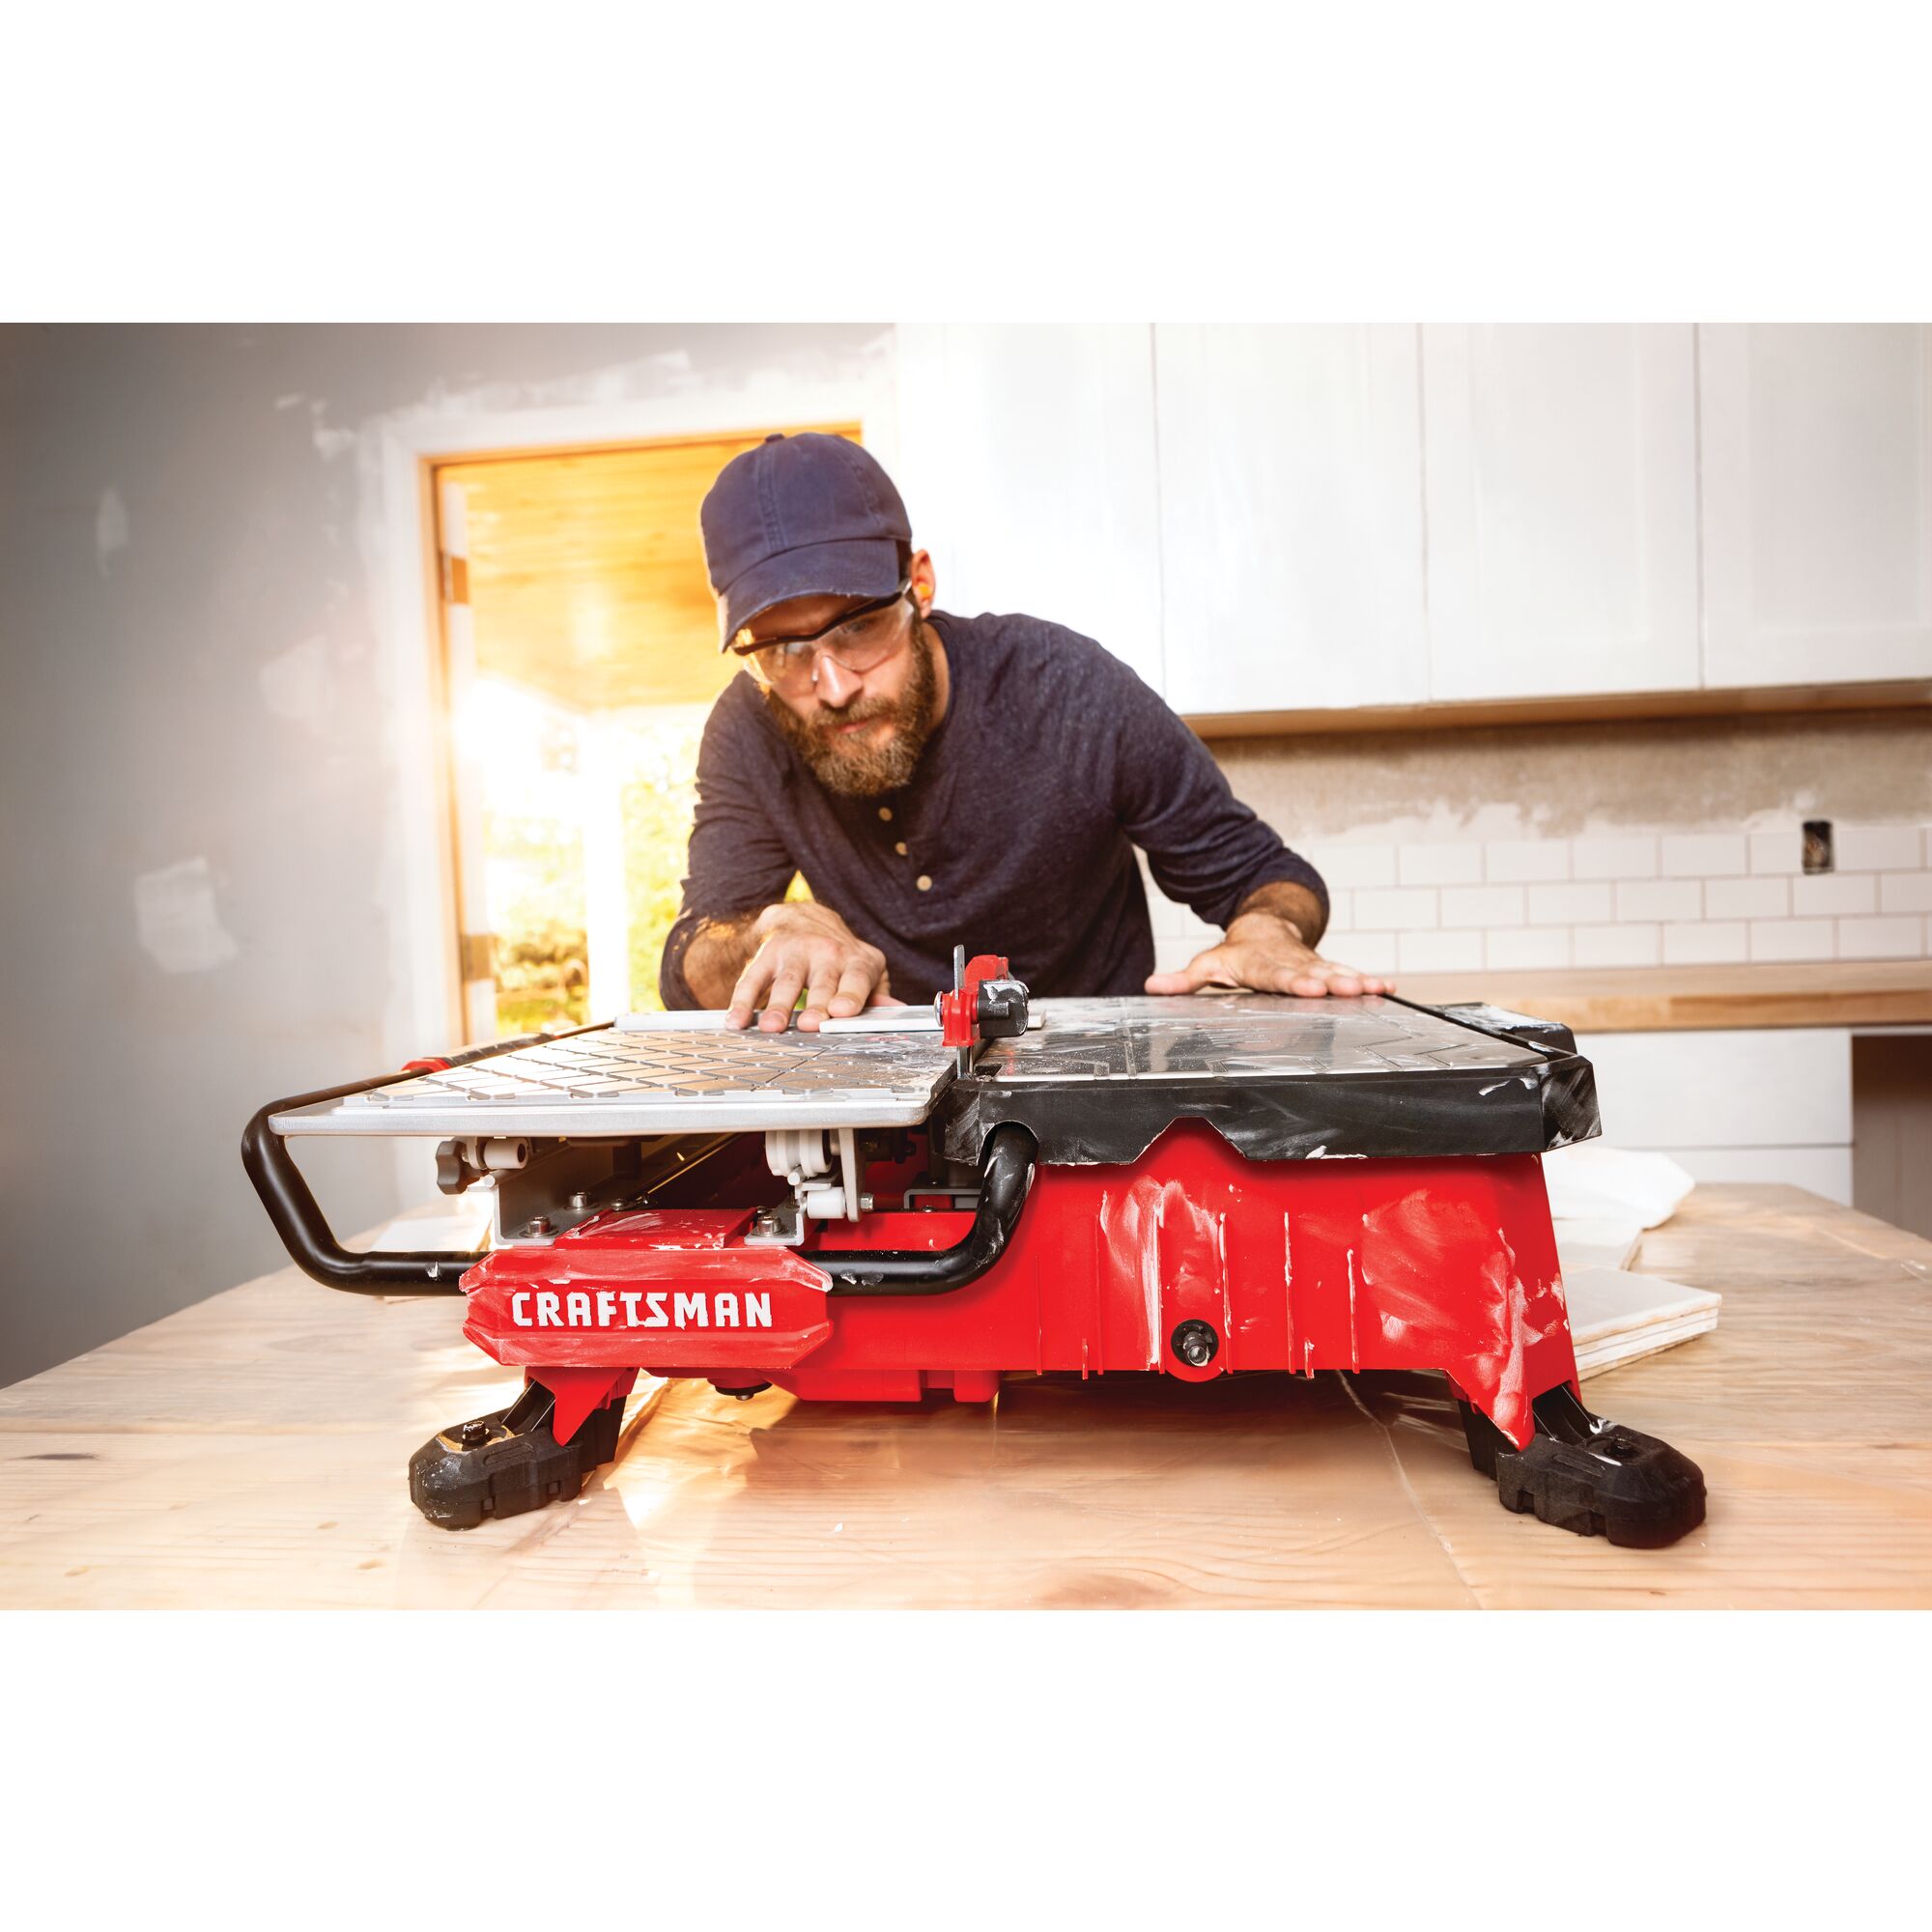 20 volt 7 inch cordless compact wet tile saw being used by a person to cut a tile.